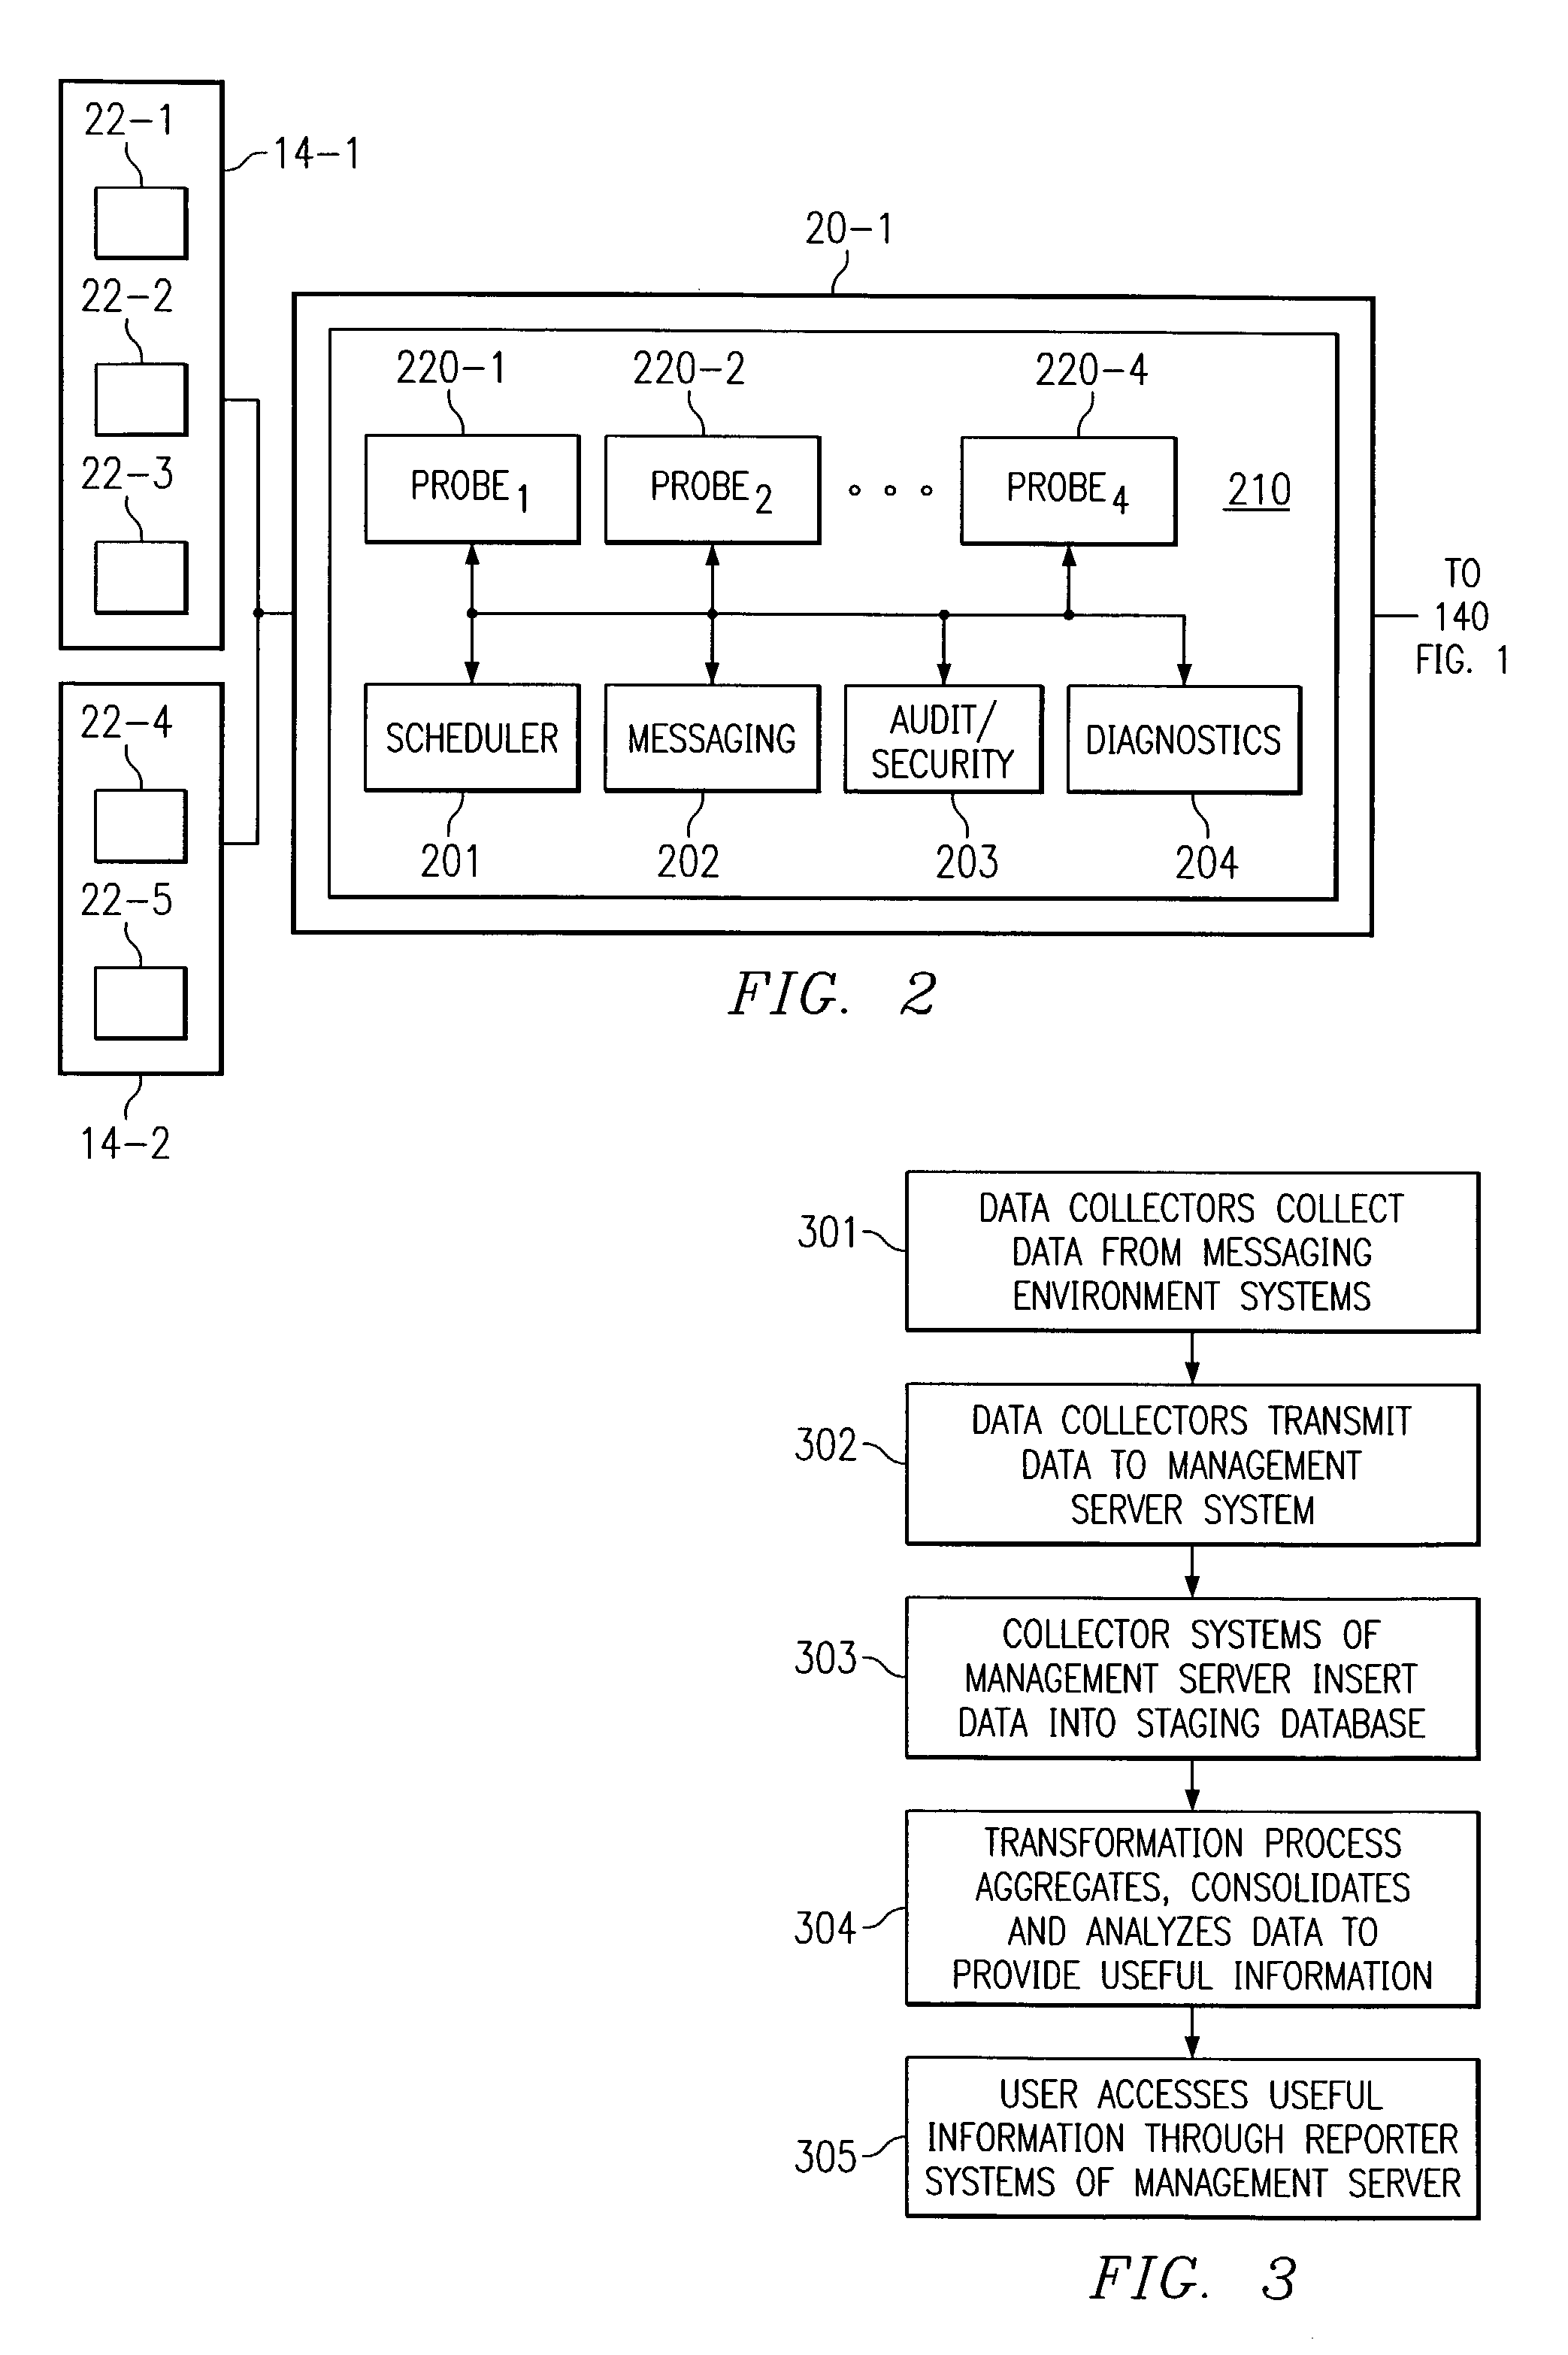 System and method for transformation and analysis of messaging data